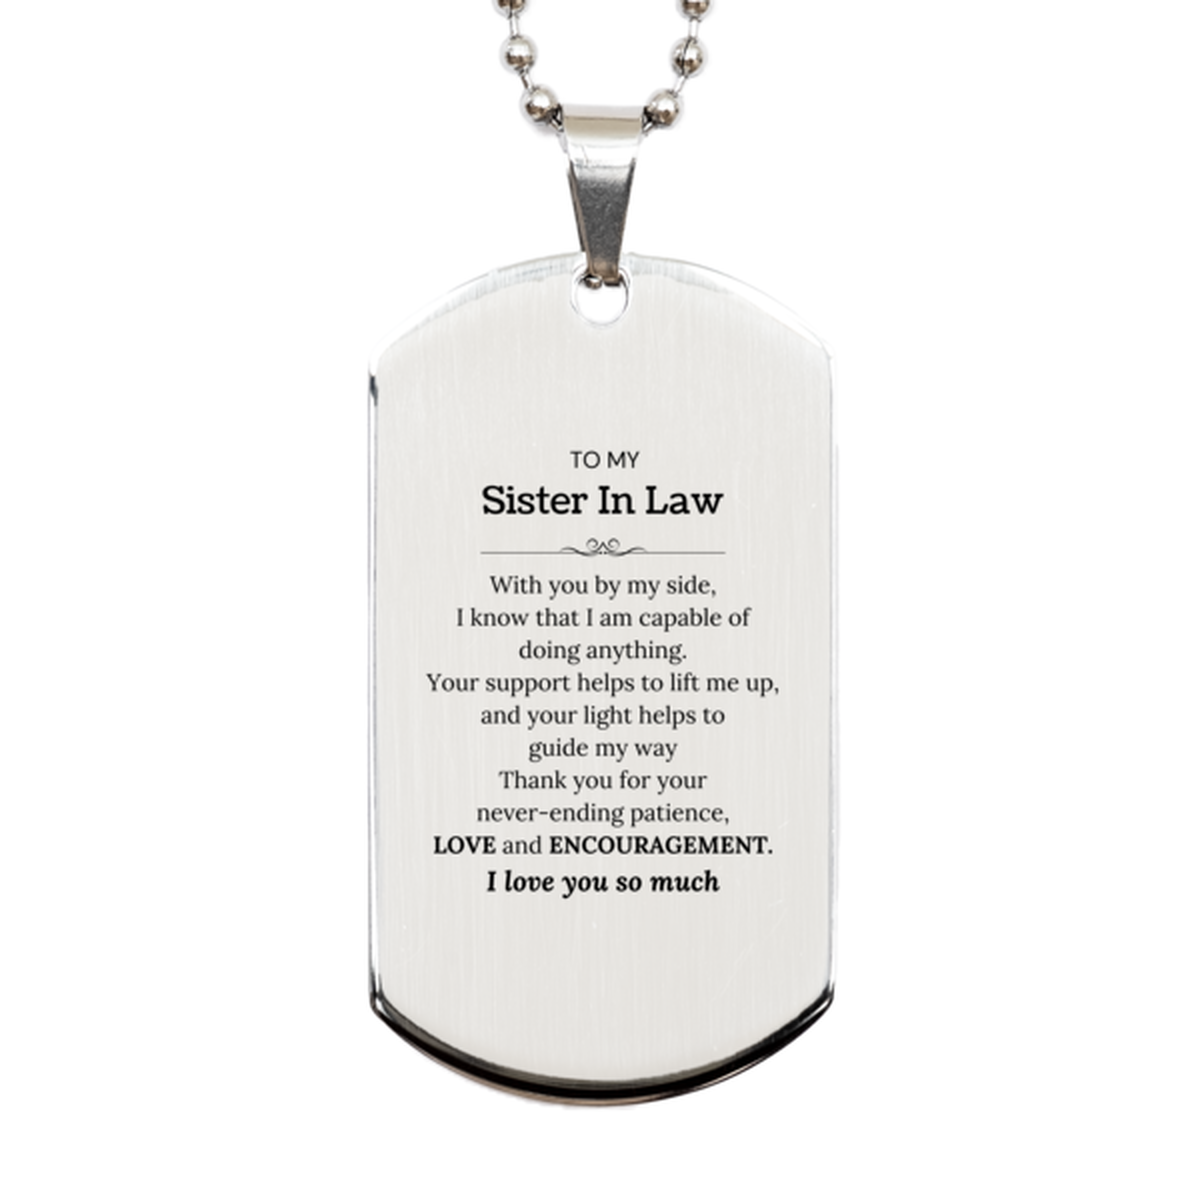 Appreciation Sister In Law Silver Dog Tag Gifts, To My Sister In Law Birthday Christmas Wedding Keepsake Gifts for Sister In Law With you by my side, I know that I am capable of doing anything. I love you so much